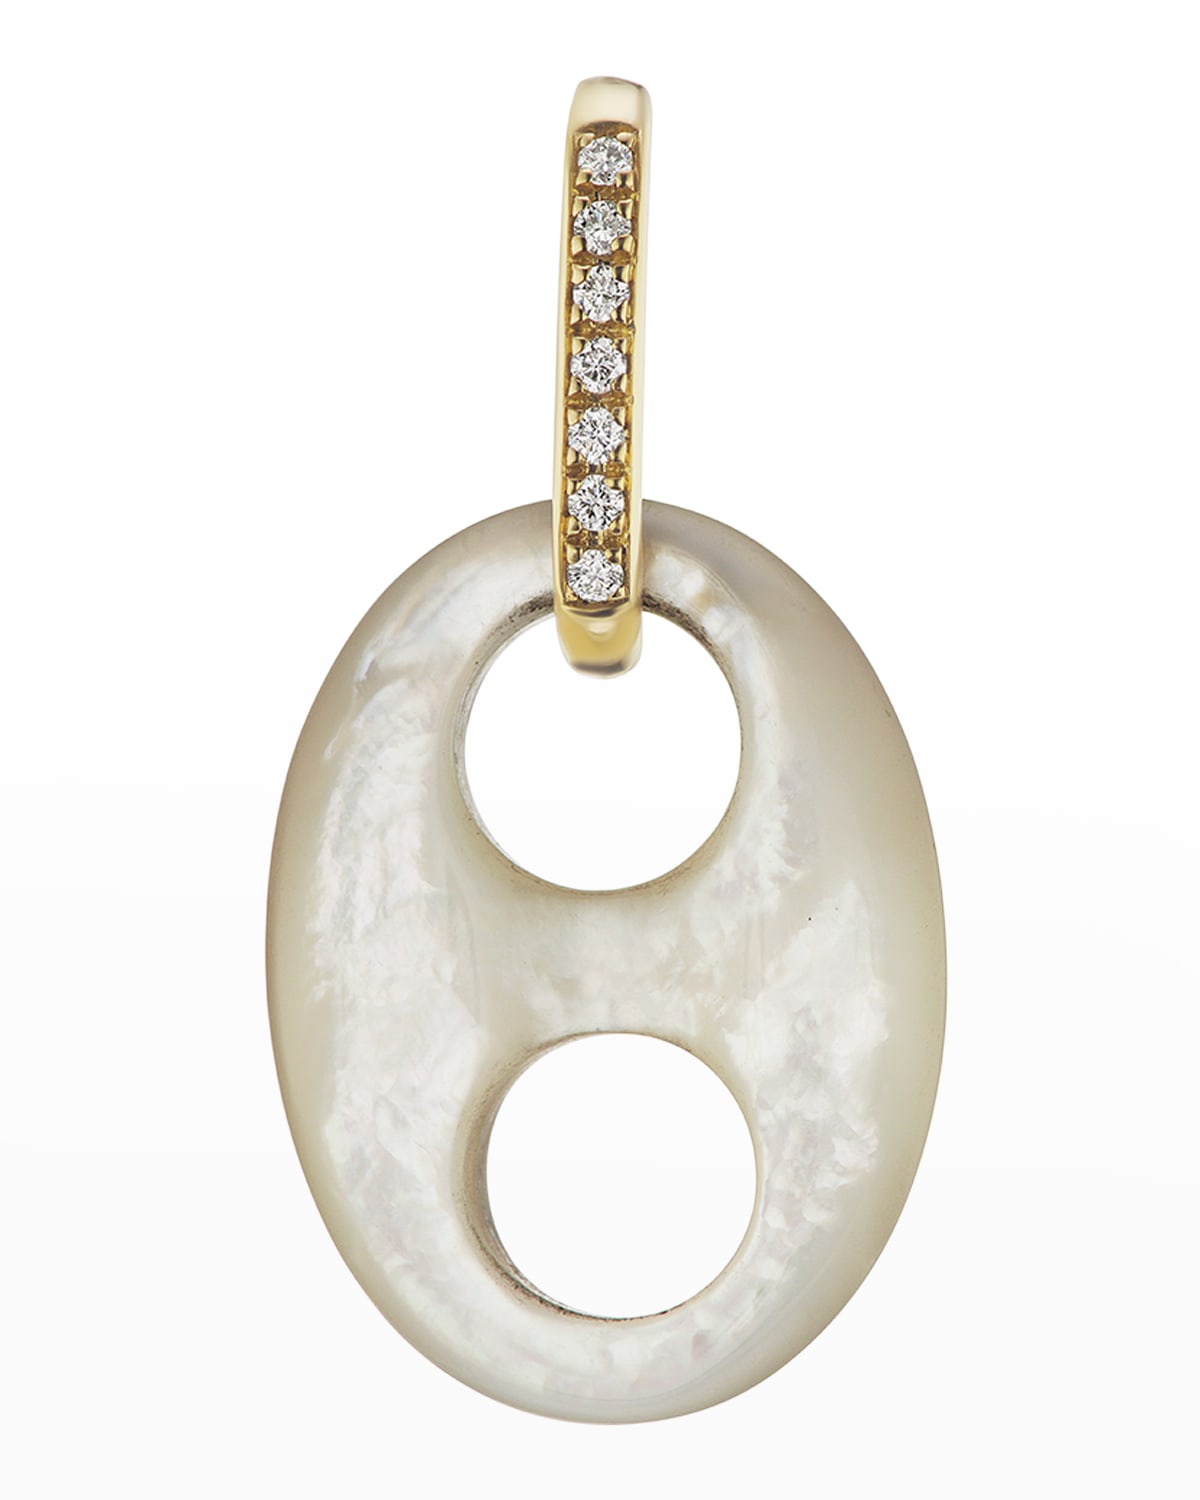 JENNA BLAKE YELLOW GOLD MARINER LINK CHARM WITH DIAMOND BALE AND MOTHER-OF-PEARL